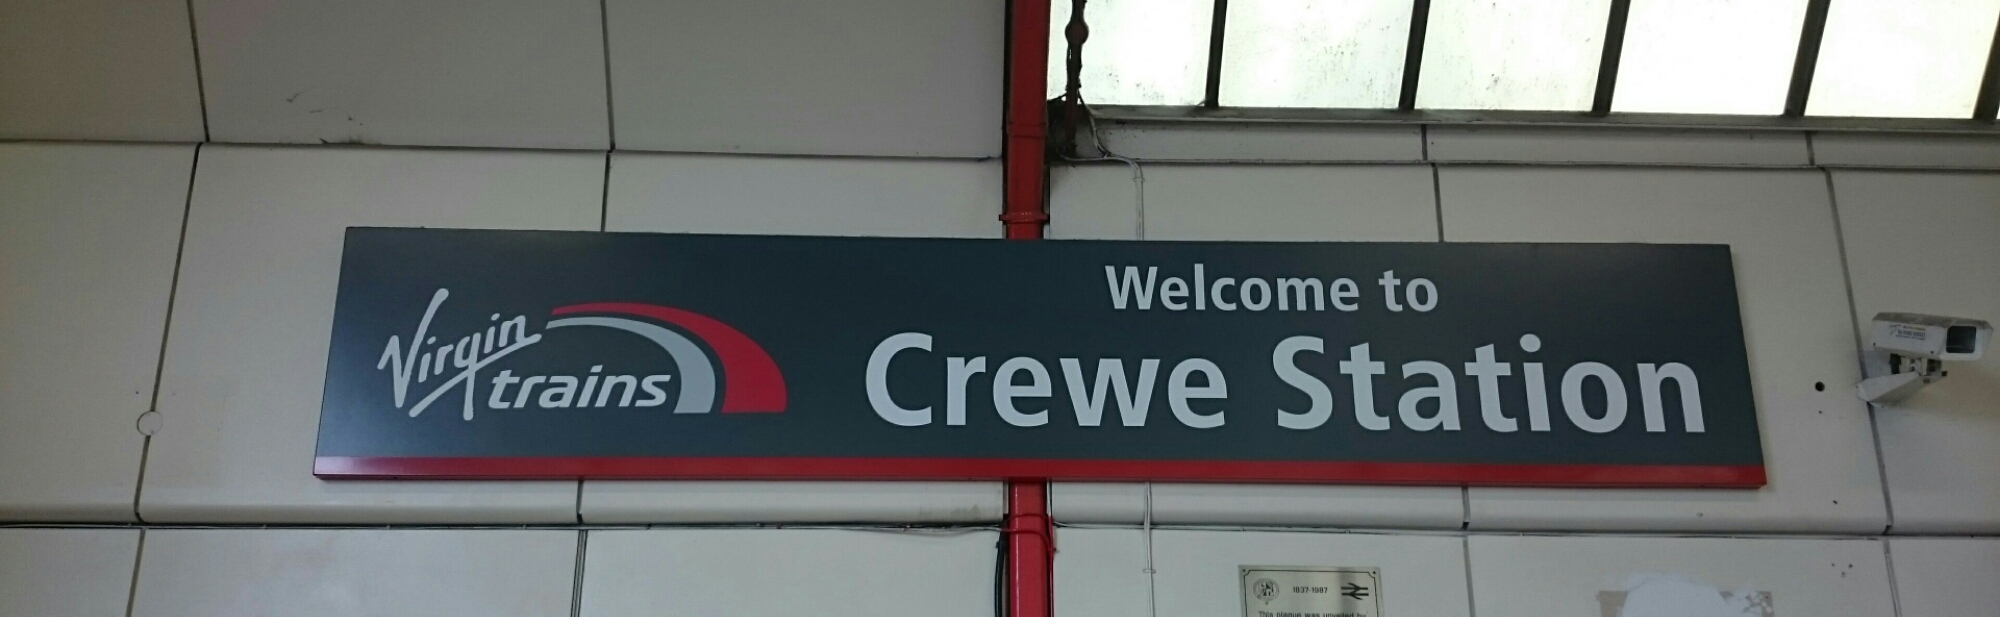 Crewe station, we've had times together you know...